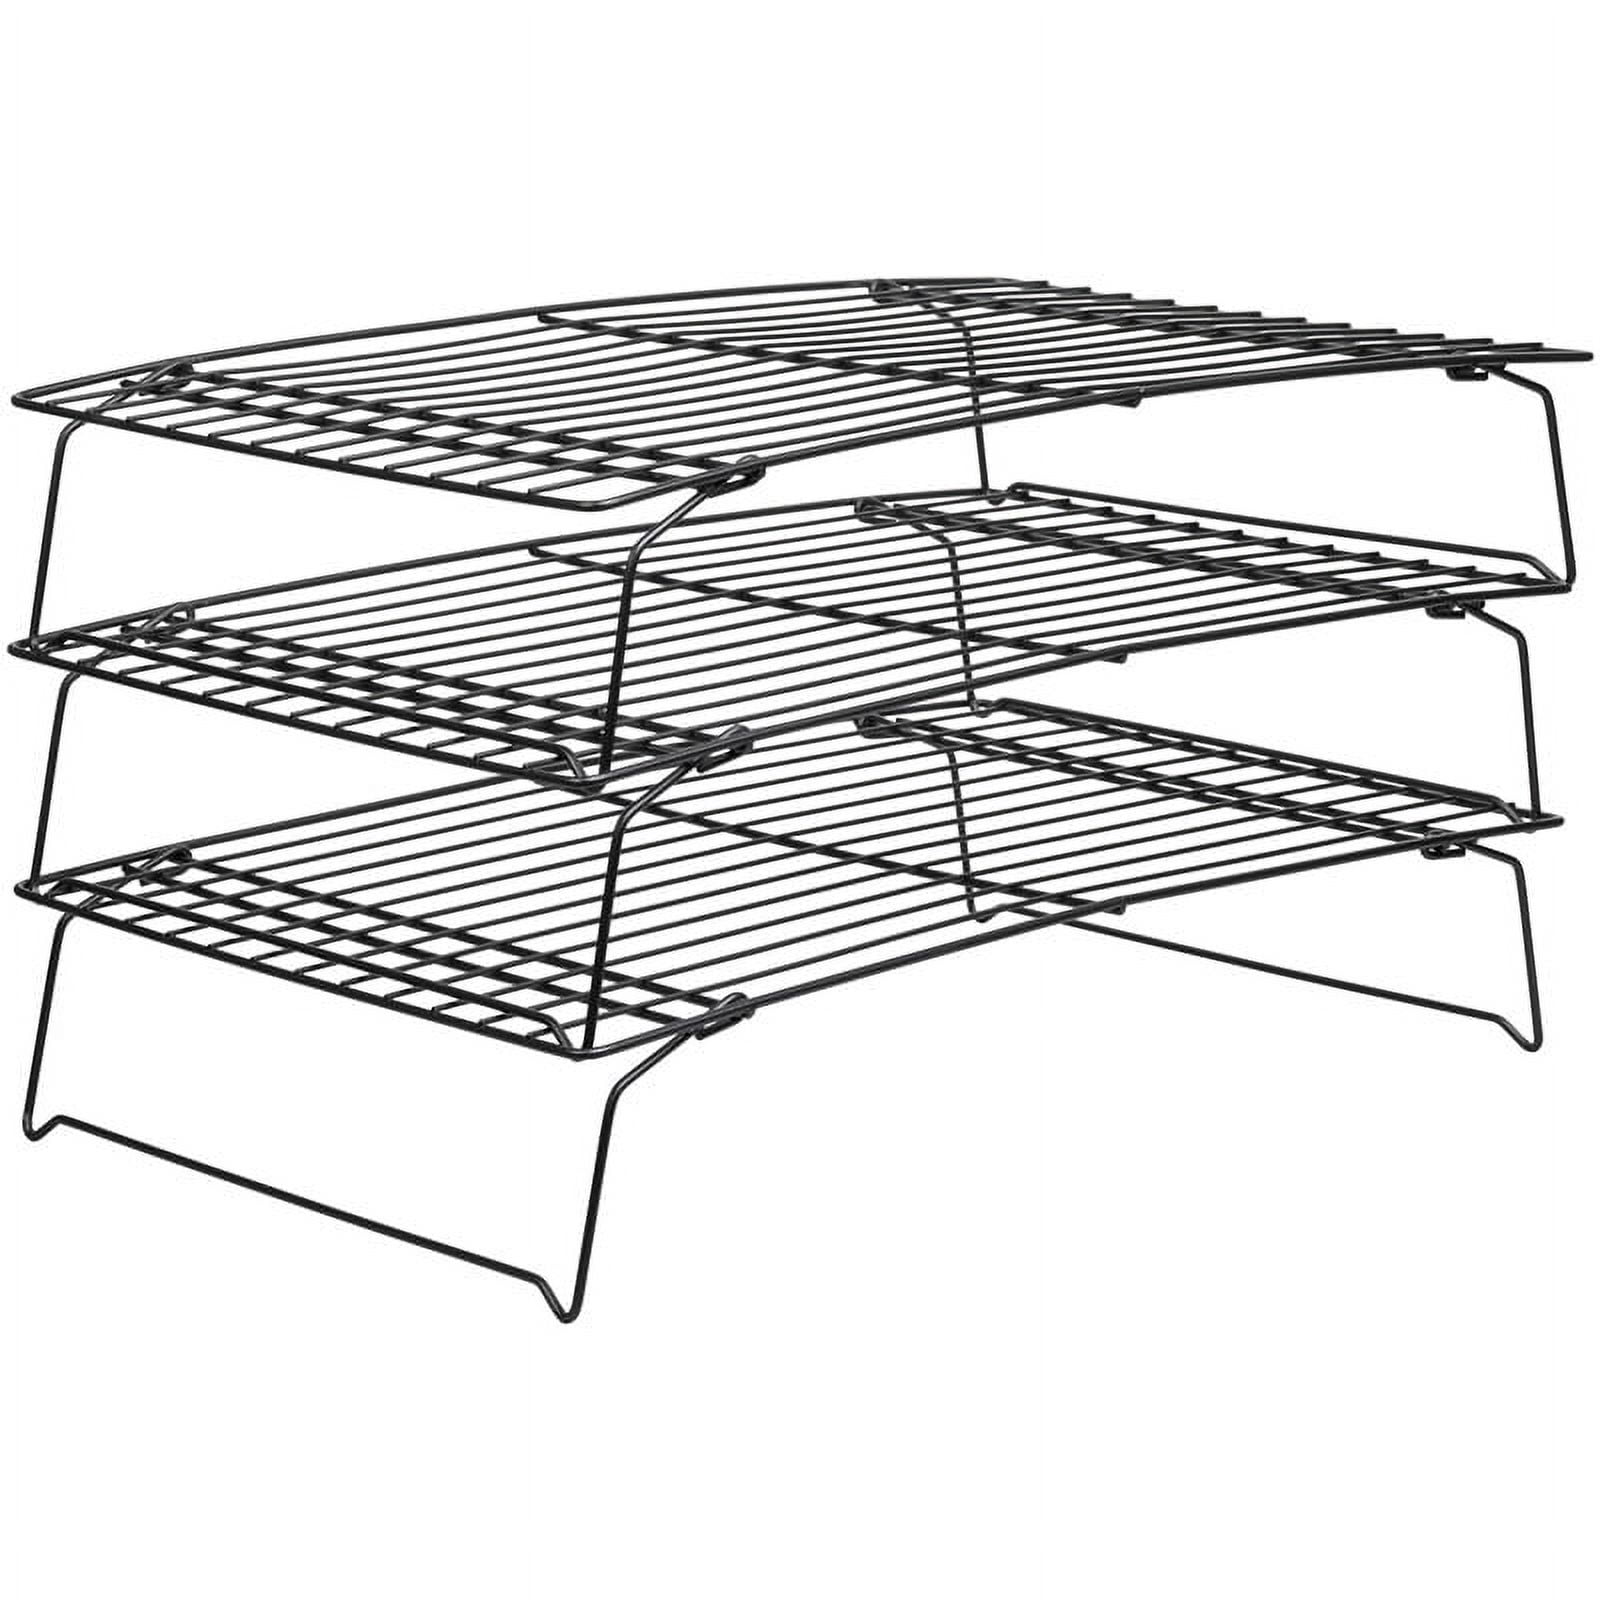 Stainless Steel Wire Half Sheet Cooling Rack(7.9x7.5) - with Collapsible  Folding Legs - For Baking, Cooking, Grilling - Perfect for Cookies,  Muffins, Bread & More 